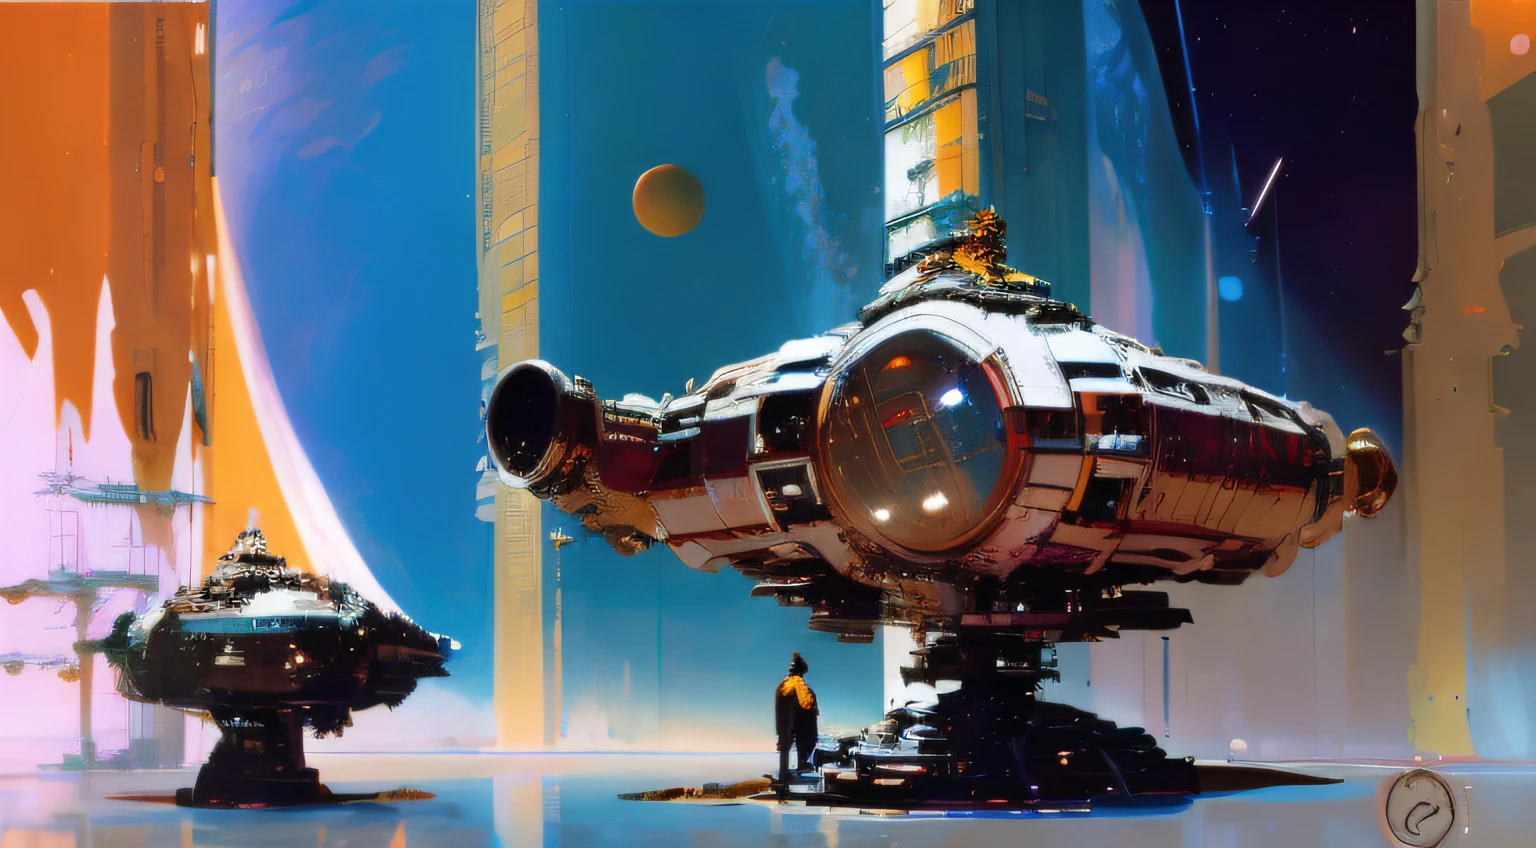 by John Berkey satellites in space orbit around the Earth, John Berkey space art style cinematography, atmospheric, photorealistic, elegant composition, Depth of Field, DOF, Tilt Blur, White Balance, 32k, Super-Resolution, Megapixel, ProPhoto RGB, VR, Halfrear Lighting, Backlight, Natural Lighting, Incandescent, Optical Fiber, Moody Lighting, Cinematic Lighting, Studio Lighting, Soft Lighting, Volumetric, Contre-Jour, Beautiful Lighting, Accent Lighting, Global Illumination, Screen Space Global Illumination, Ray Tracing Global Illumination, Optics, Scattering, Glowing, Shadows, Rough, Shimmering, Ray Tracing Reflections, Lumen Reflections, Screen Space Reflections, Diffraction Grading, Chromatic Aberration, GB Displacement, Scan Lines, Ray Traced, Ray Tracing Ambient Occlusion, Anti-Aliasing, FKAA, TXAA, RTX, SSAO, Shaders, OpenGL-Shaders, GLSL-Shaders, Post Processing, Post-Production, Cel Shading, Tone Mapping, CGI, VFX, SFX, insanely detailed and intricate, hypermaximalist, elegant, hyper realistic, super detailed, dynamic pose, photography cinematic, intense, cinematic composition + intricate detailed, cinematic lighting + rim lighting + color grading + focus + bokeh, 1X + Unsplash + 500px, taken by Canon EOS R5 RF85mm F1.8 MACRO lens 1/100sec